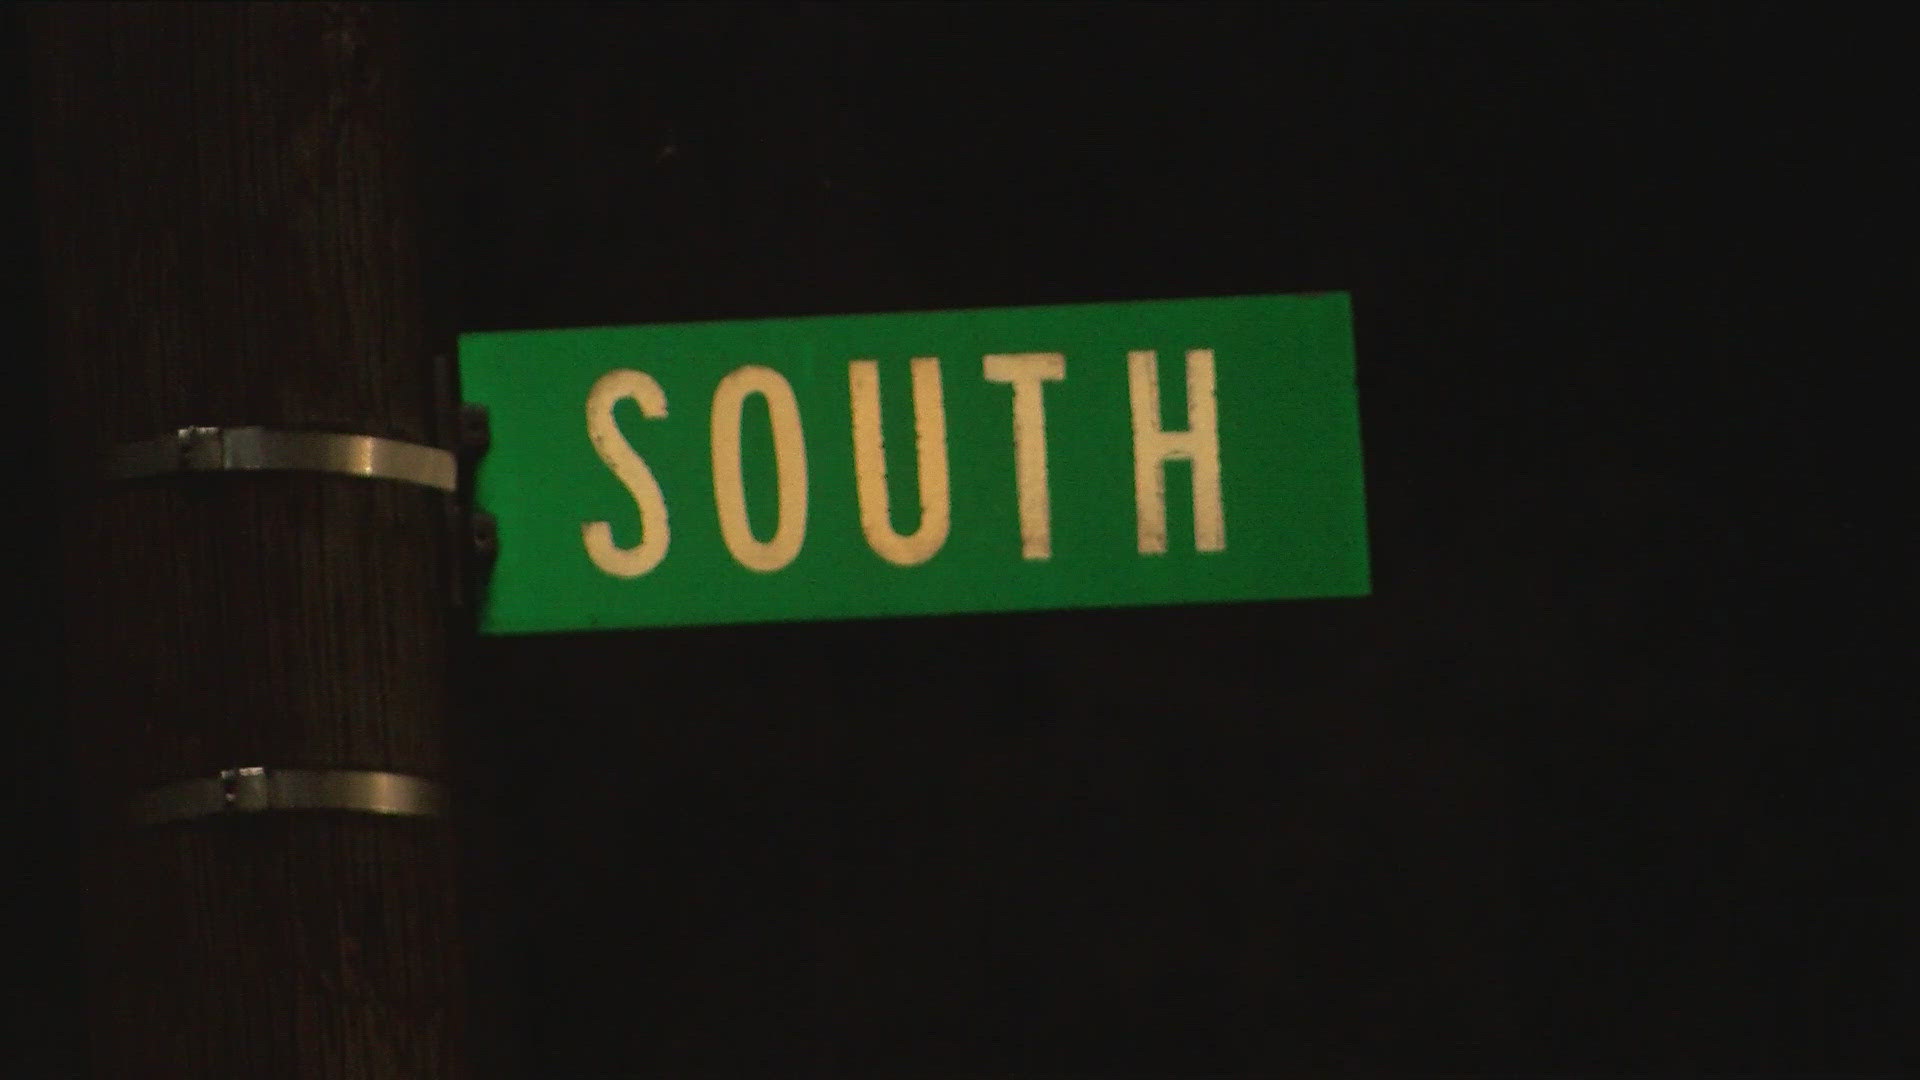 Officers responded to the intersection of South Avenue and Carlton Street just before 10 p.m. after receiving a report of a 12-year-old shot in the knee.